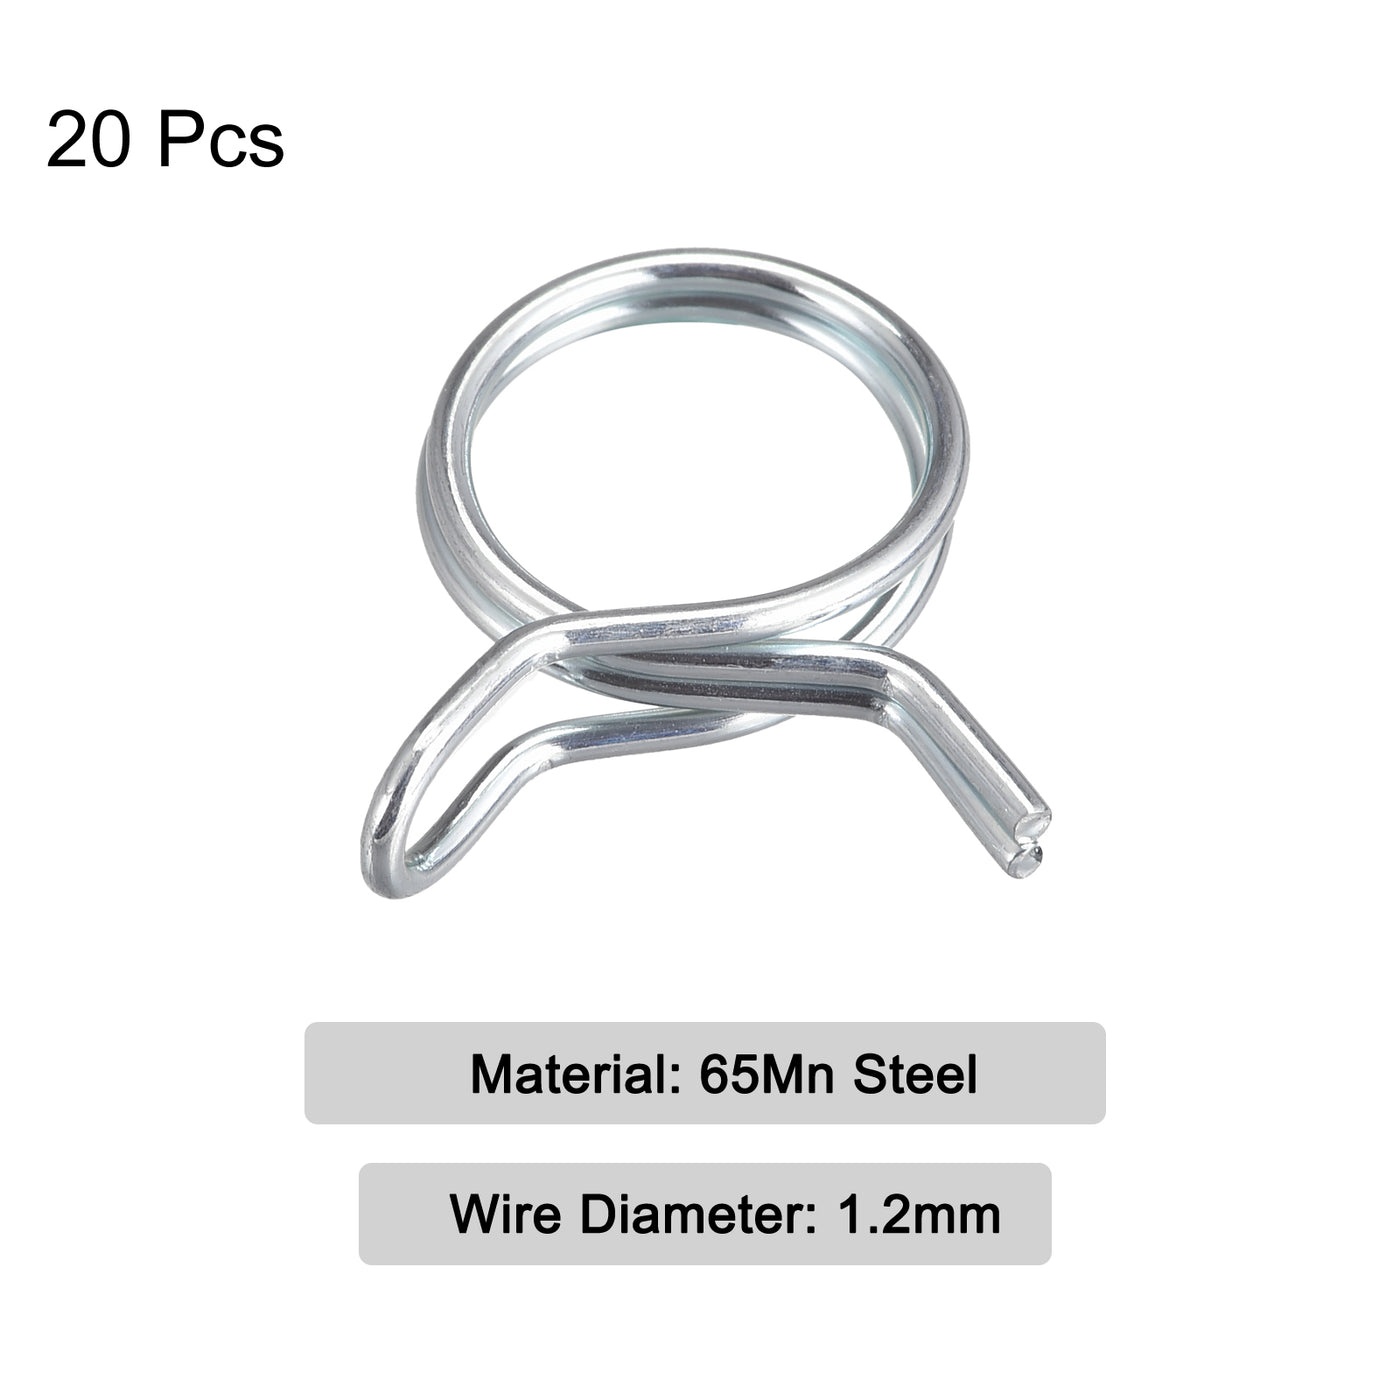 Uxcell Uxcell Double Wire Spring Hose Clamp, 20pcs 65Mn Steel 10mm Spring Clips, Silver Tone